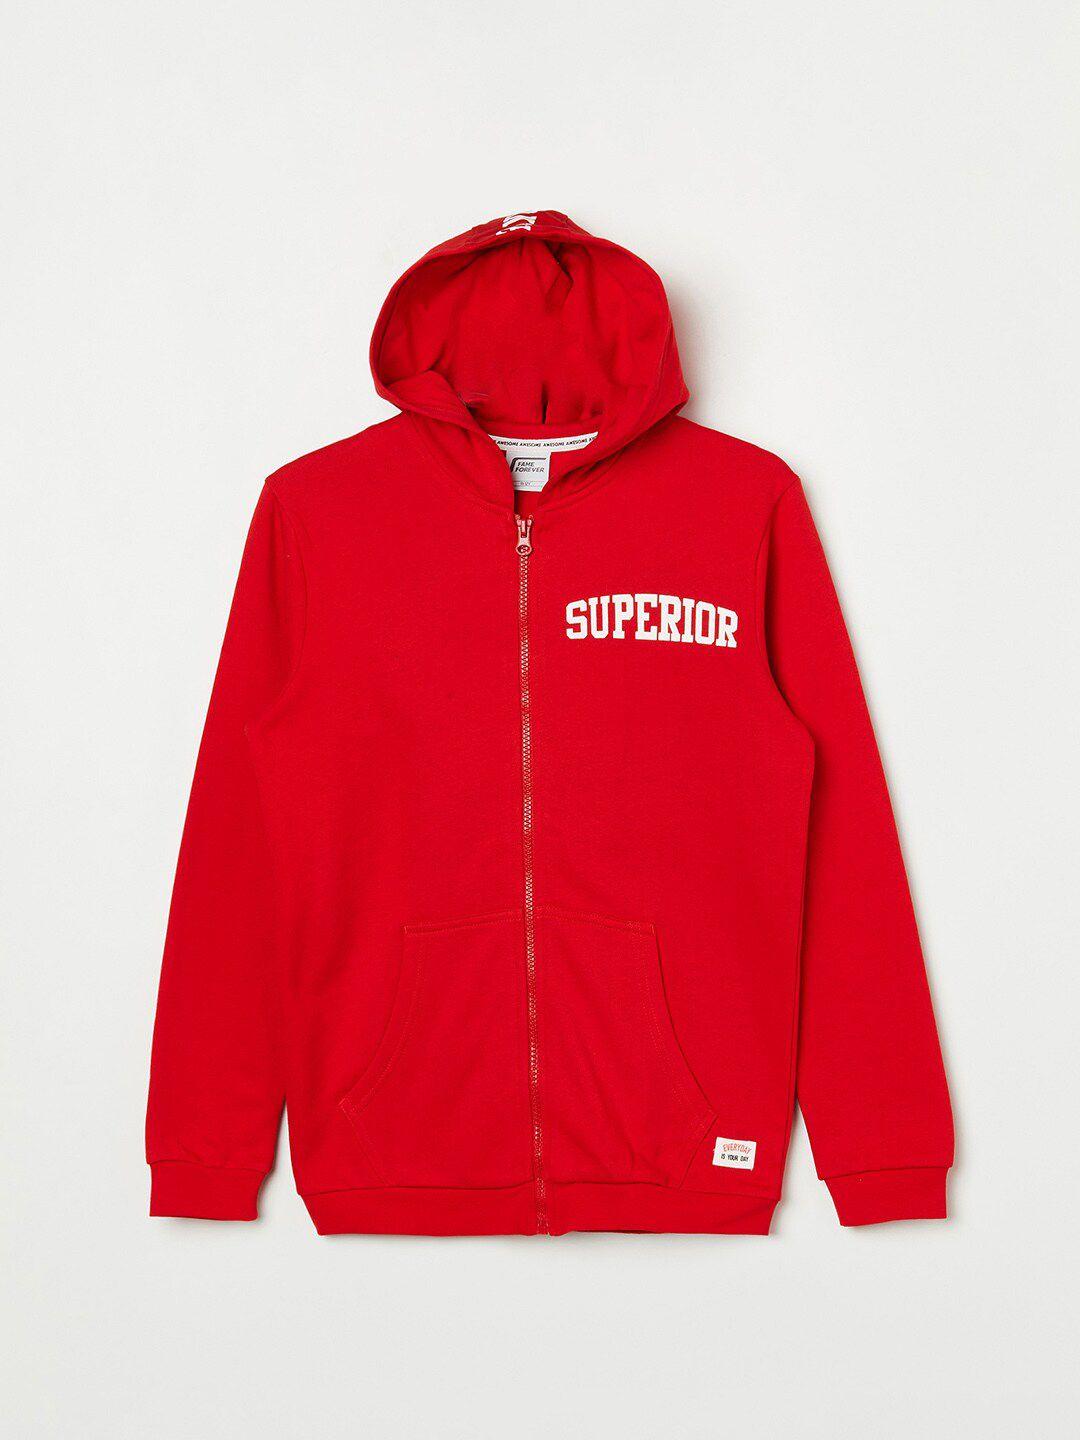 fame-forever-by-lifestyle-boys-red-cotton-printed-hooded-sweatshirt